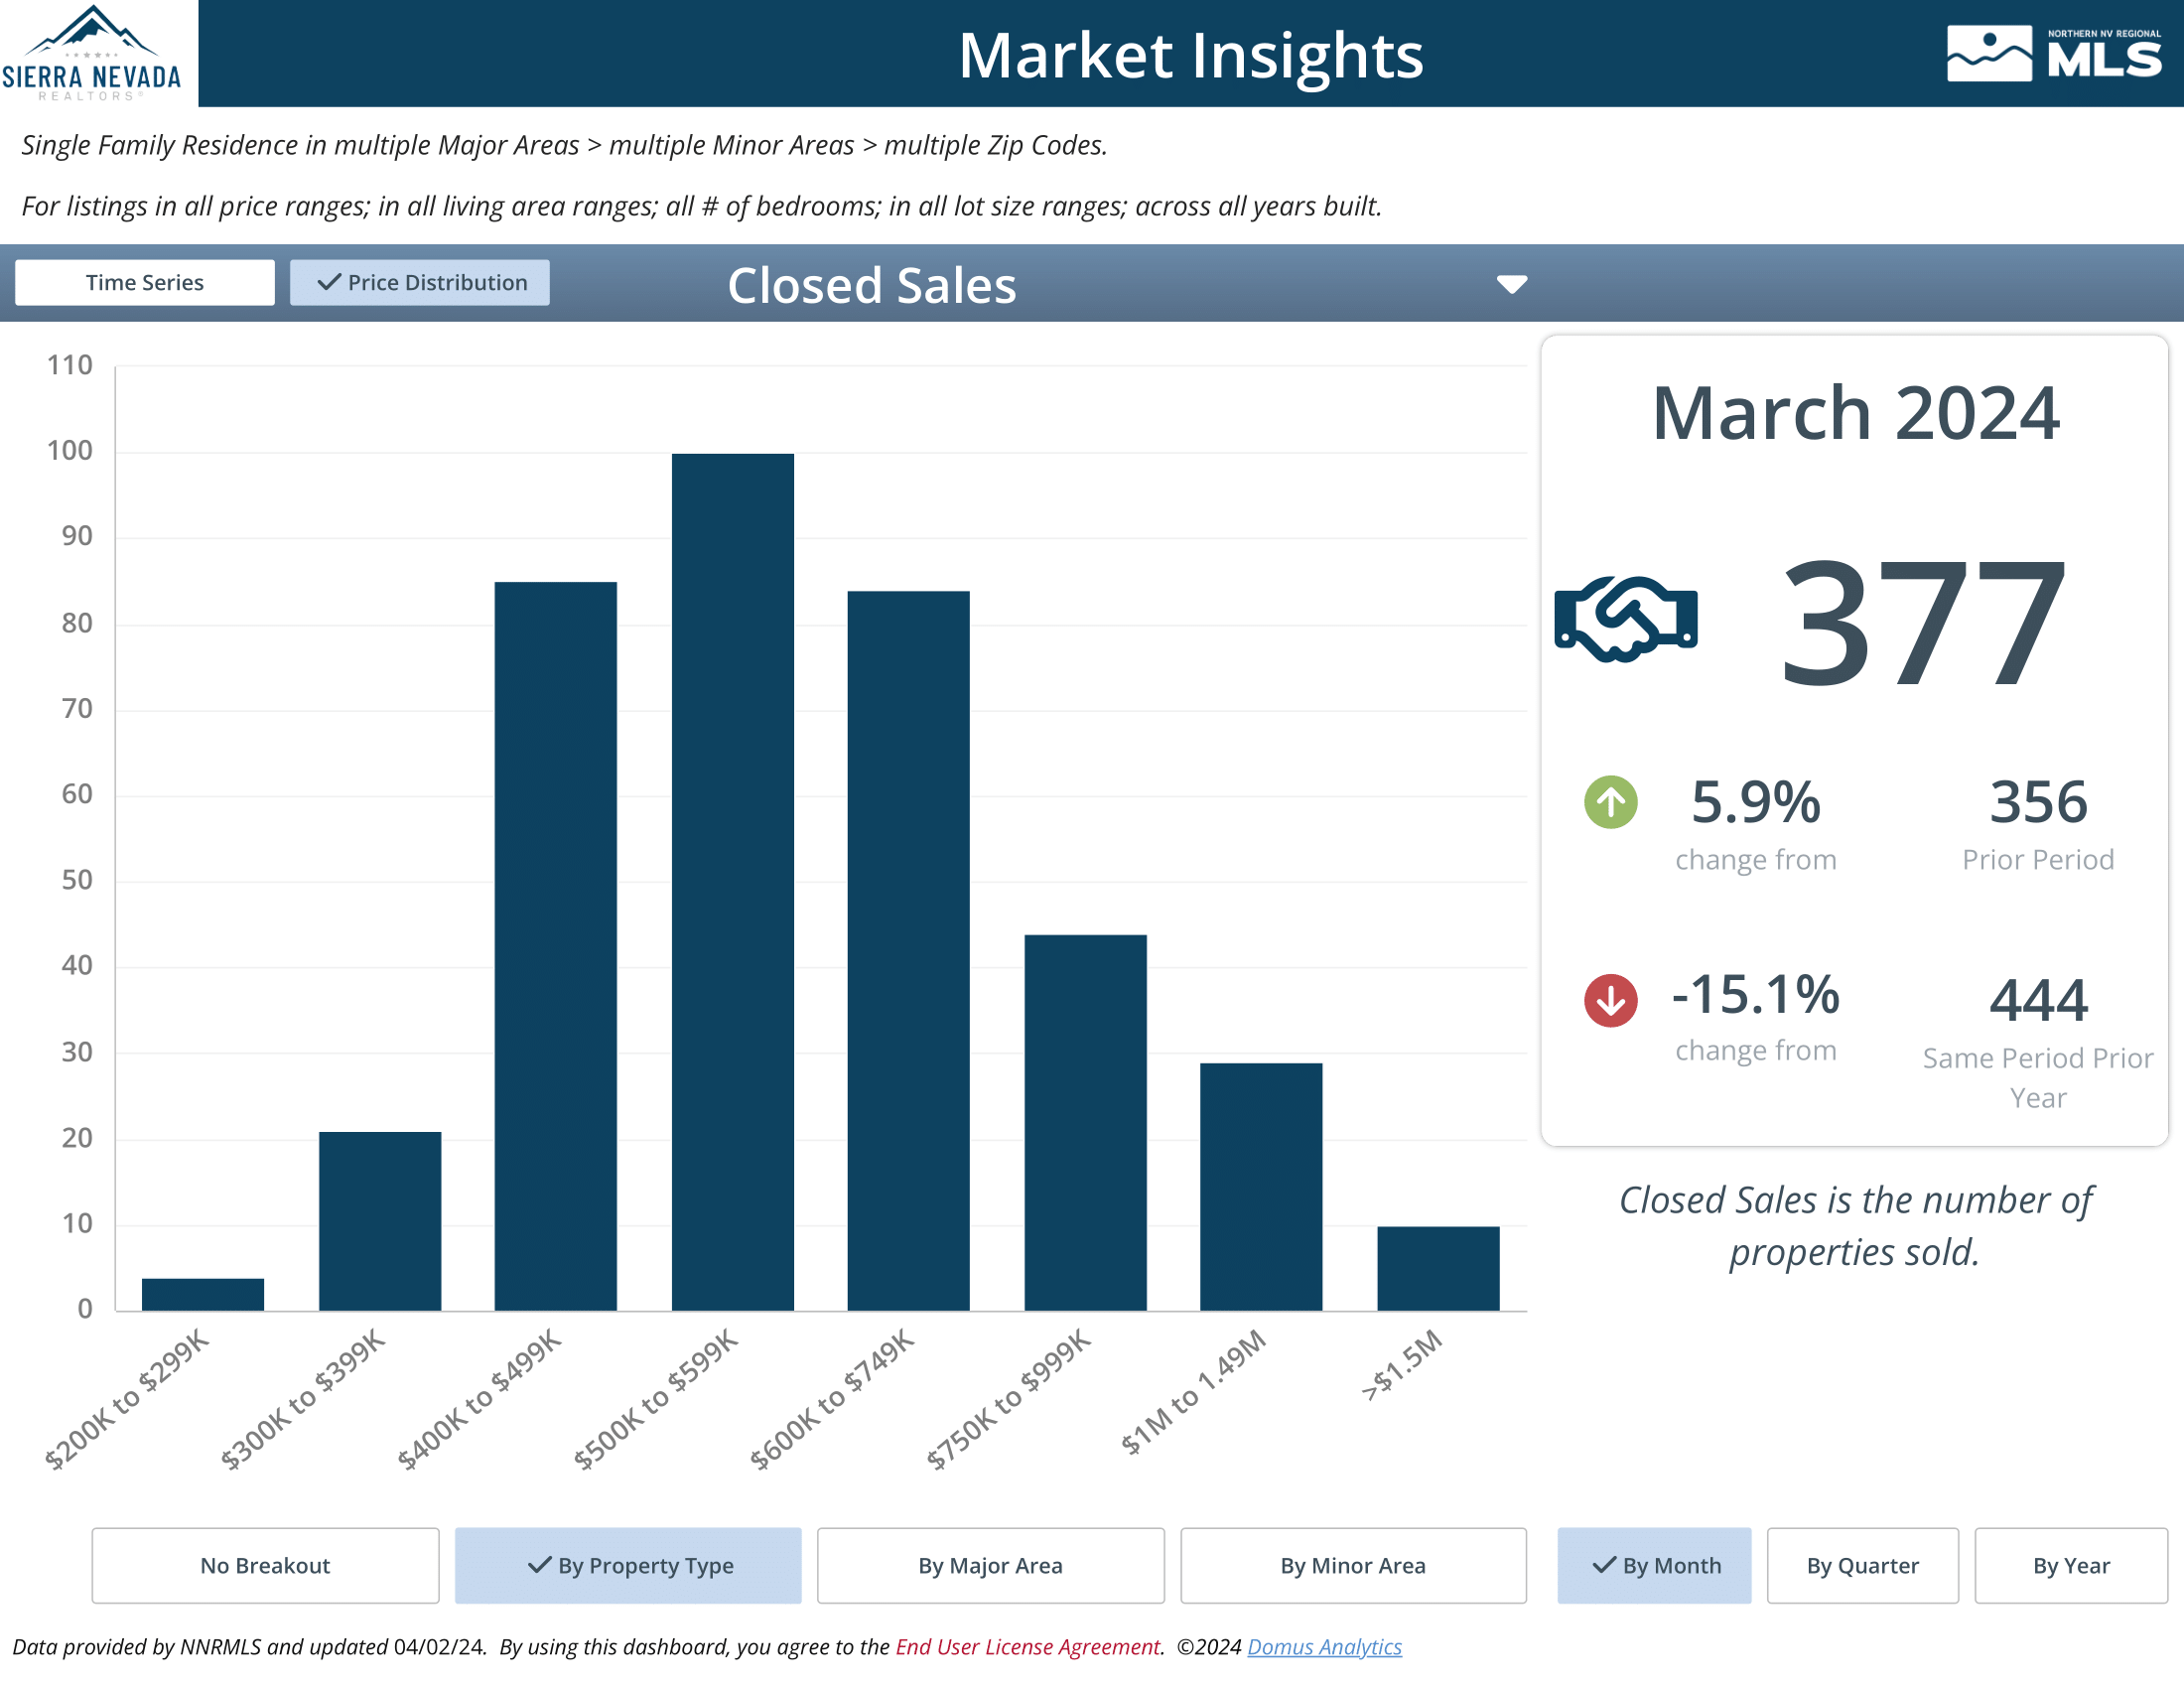 March 2024 Closed Sales